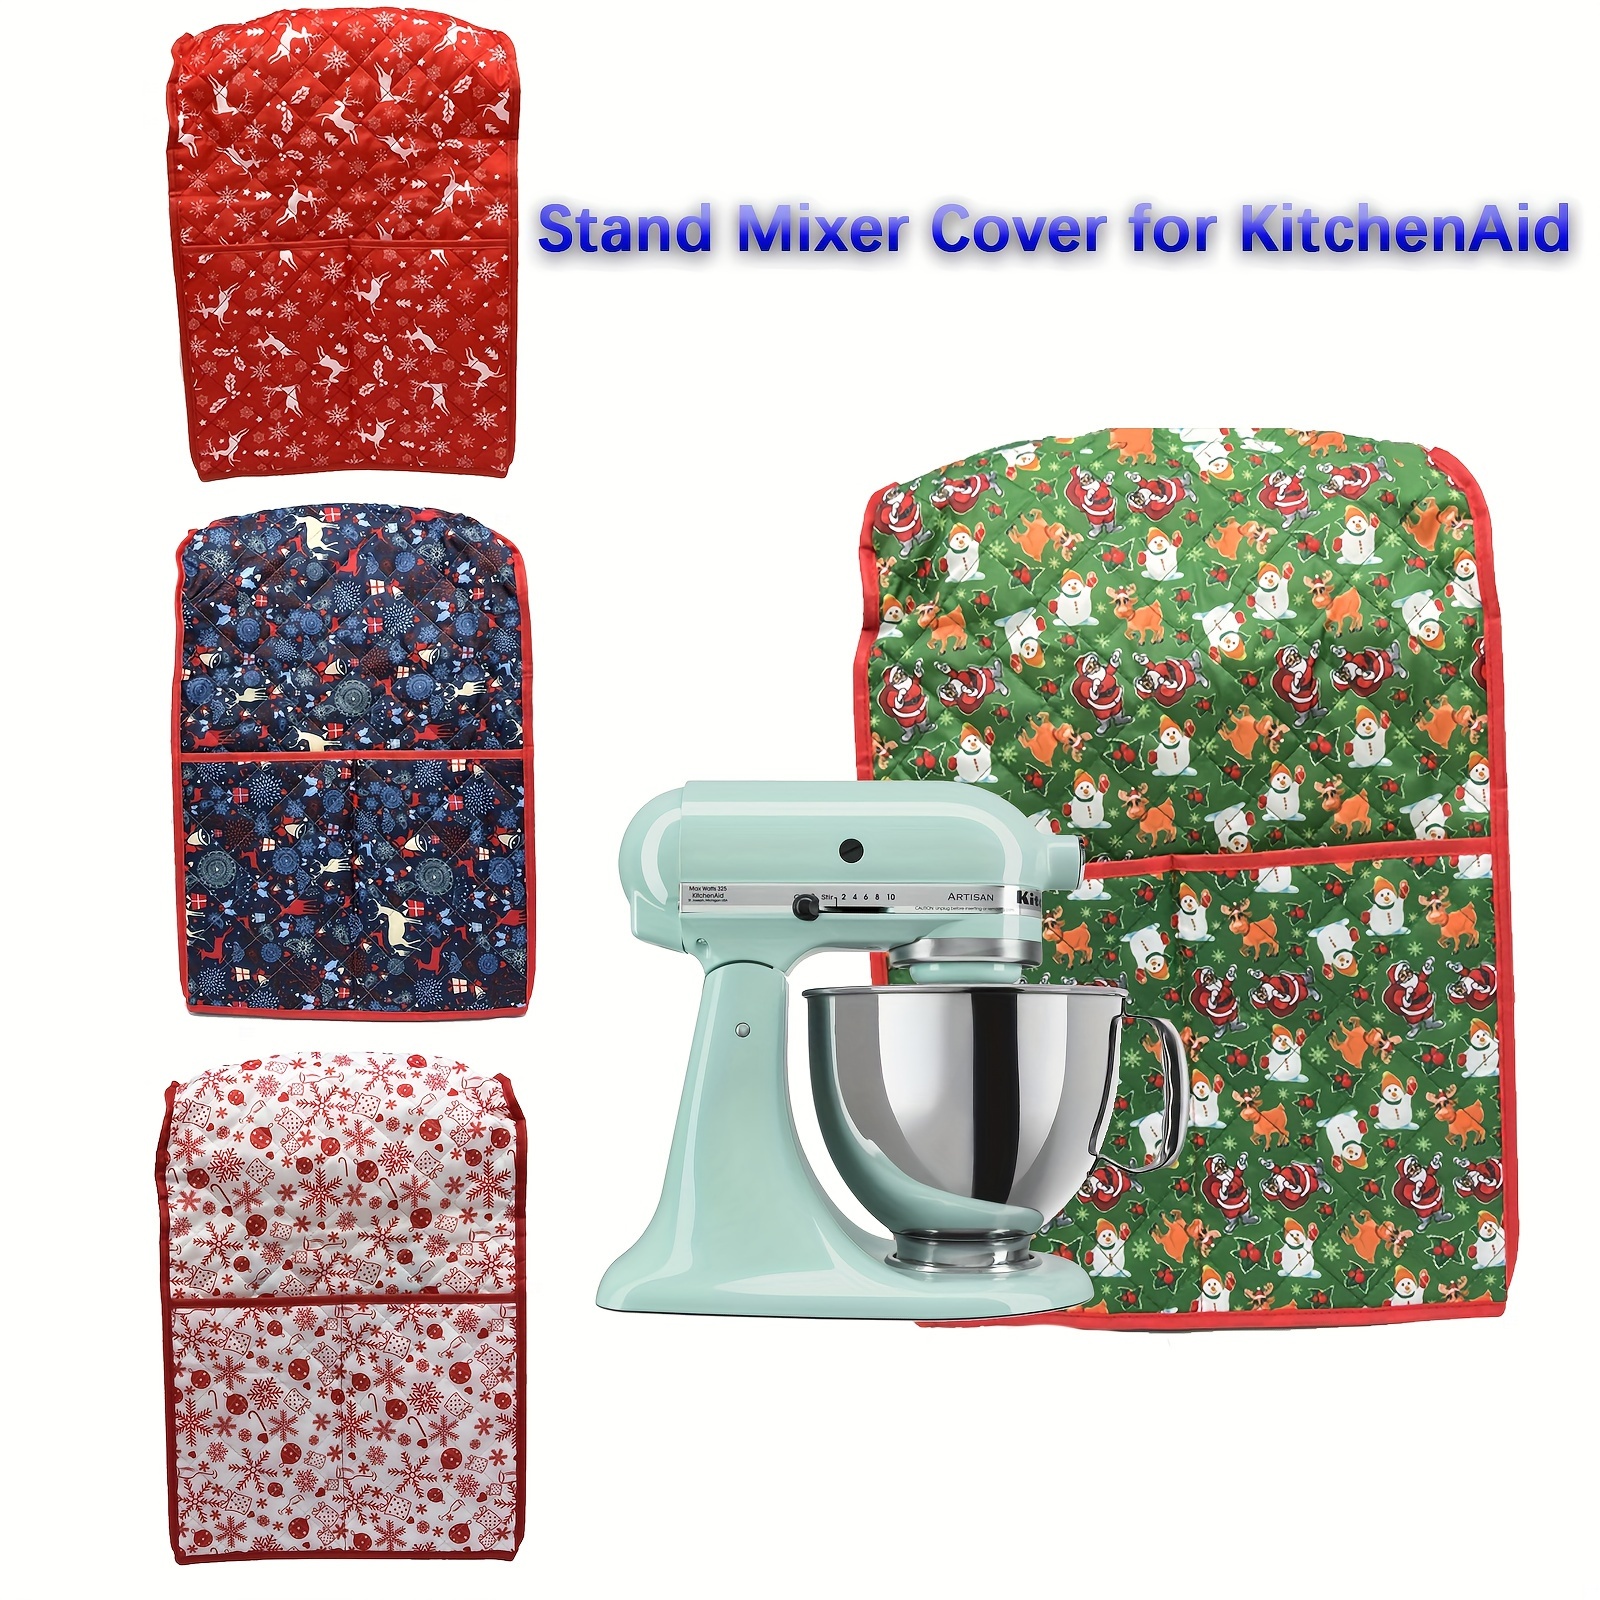 KitchenAid Professional Mixer Pattern to Make a Mixer Dust Cover